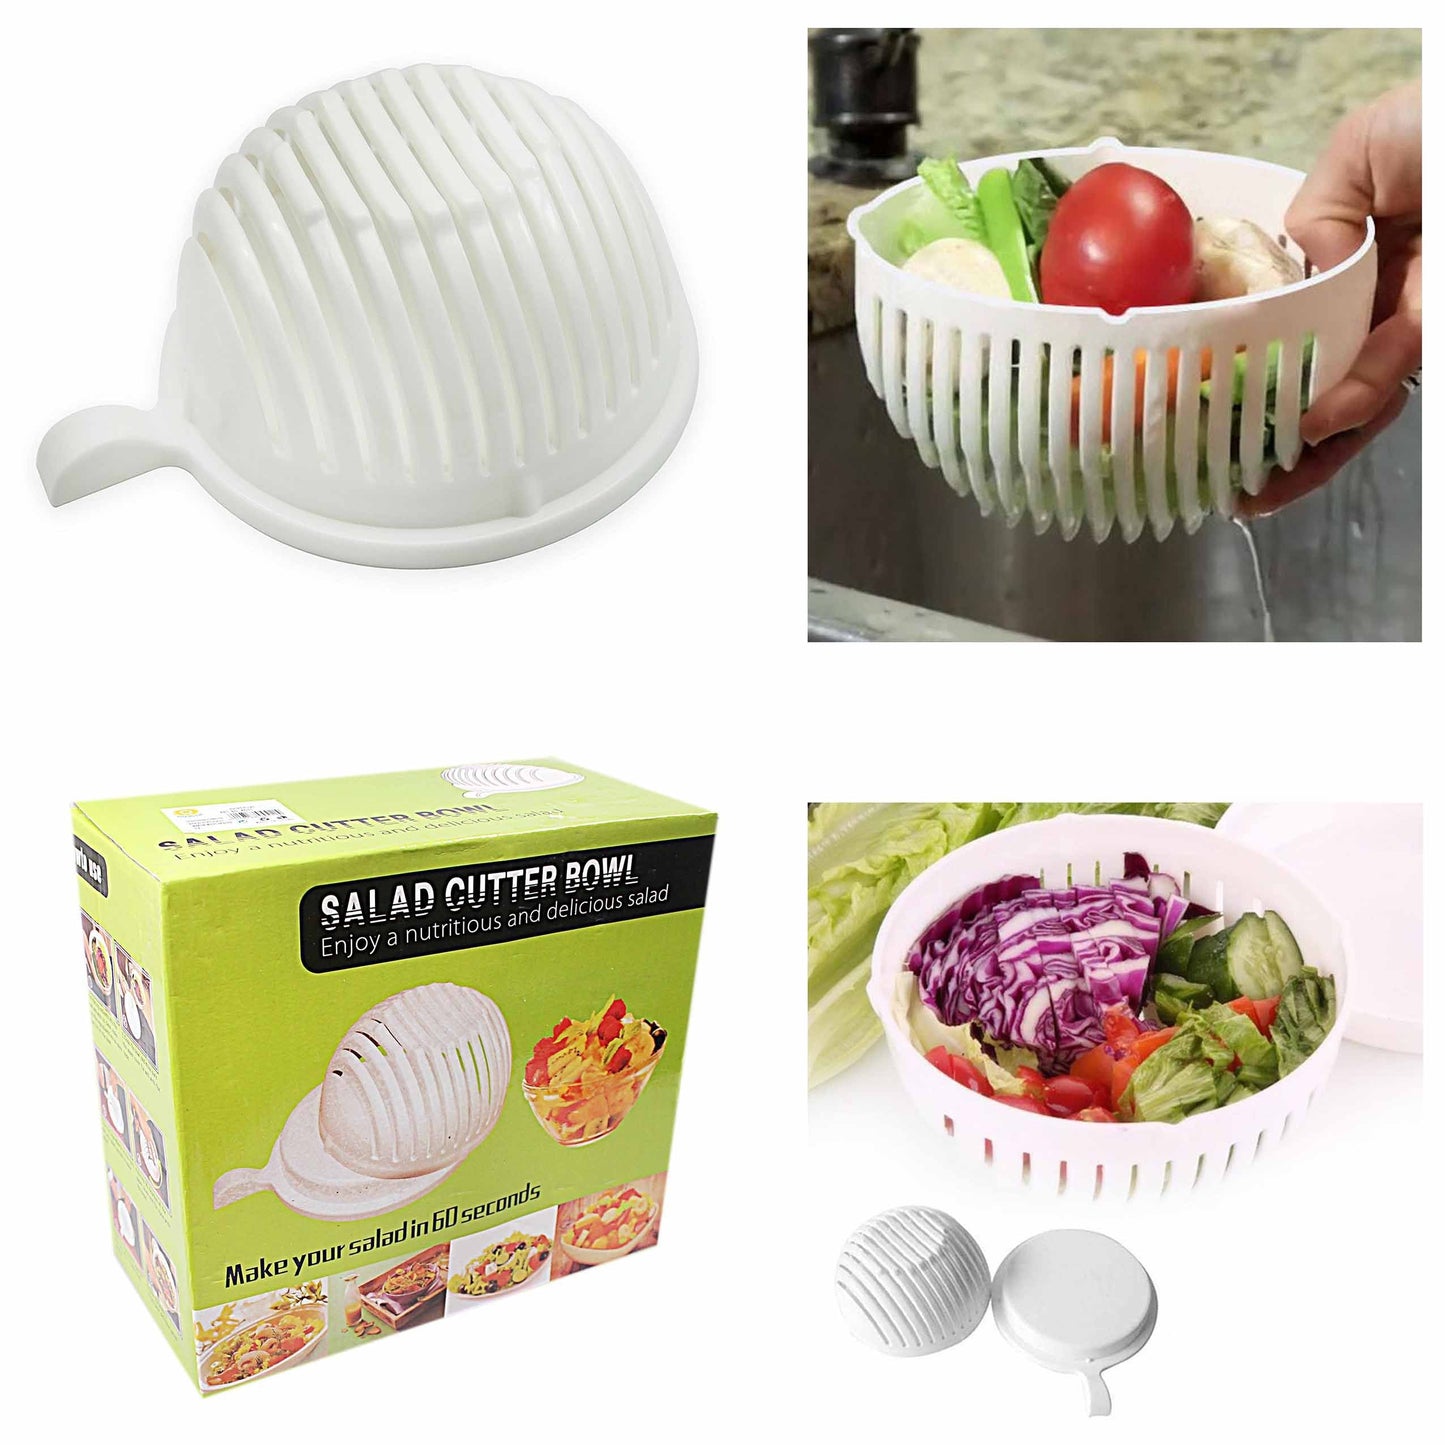 No Hassle Salad Cutter Bowl Make Salad In 60 Seconds 4511 (Parcel Rate)